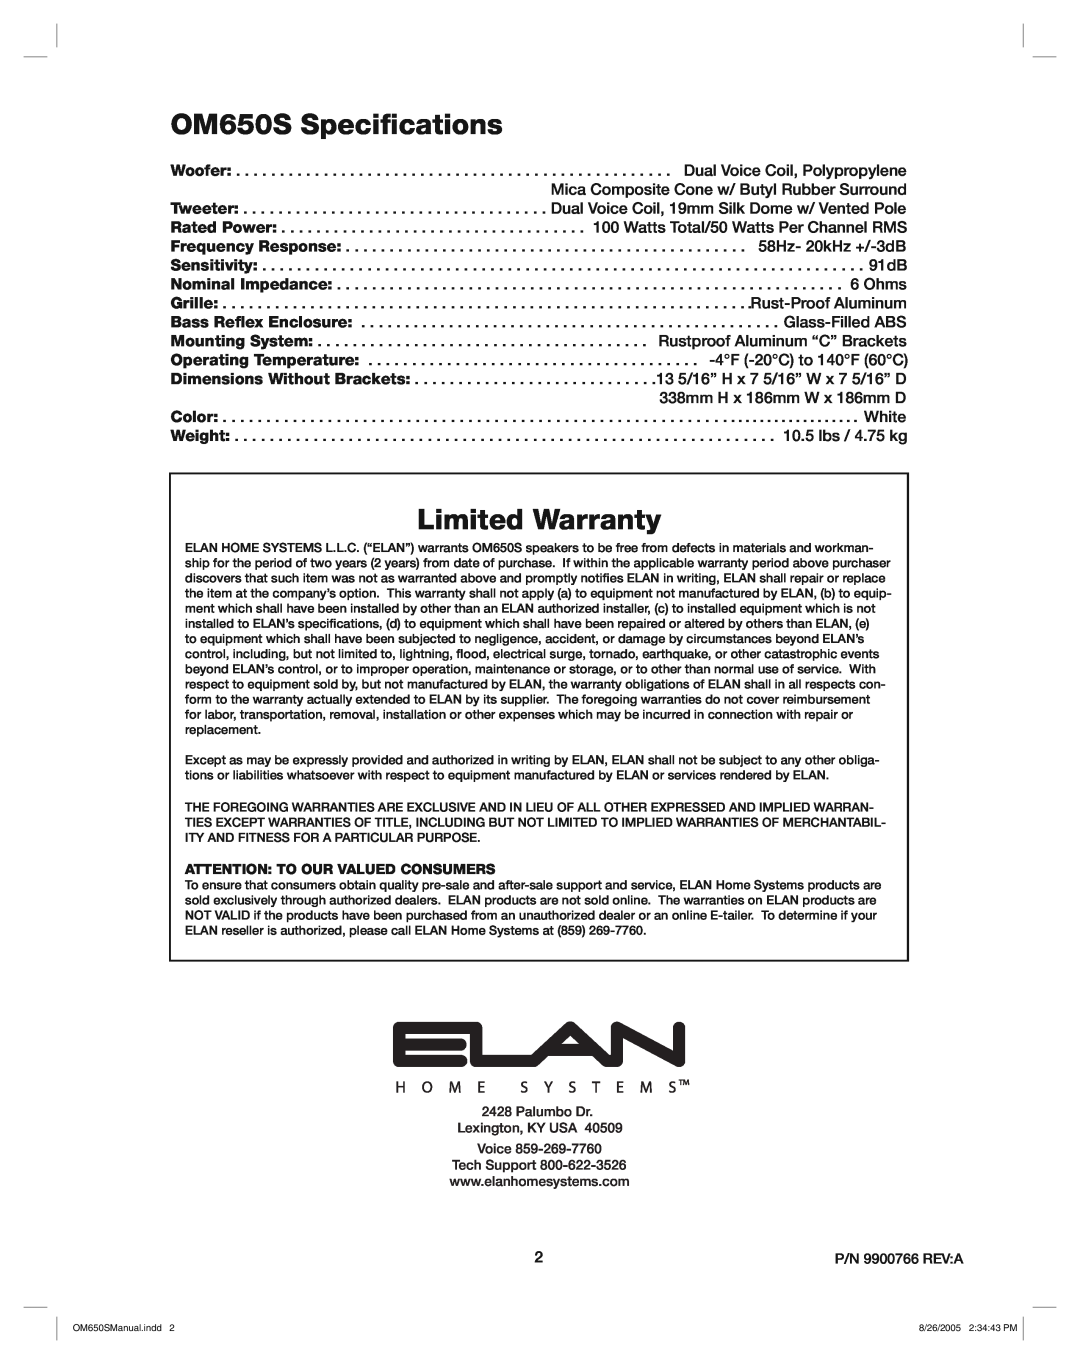 ELAN Home Systems manual OM650S Speciﬁcations, Limited Warranty 